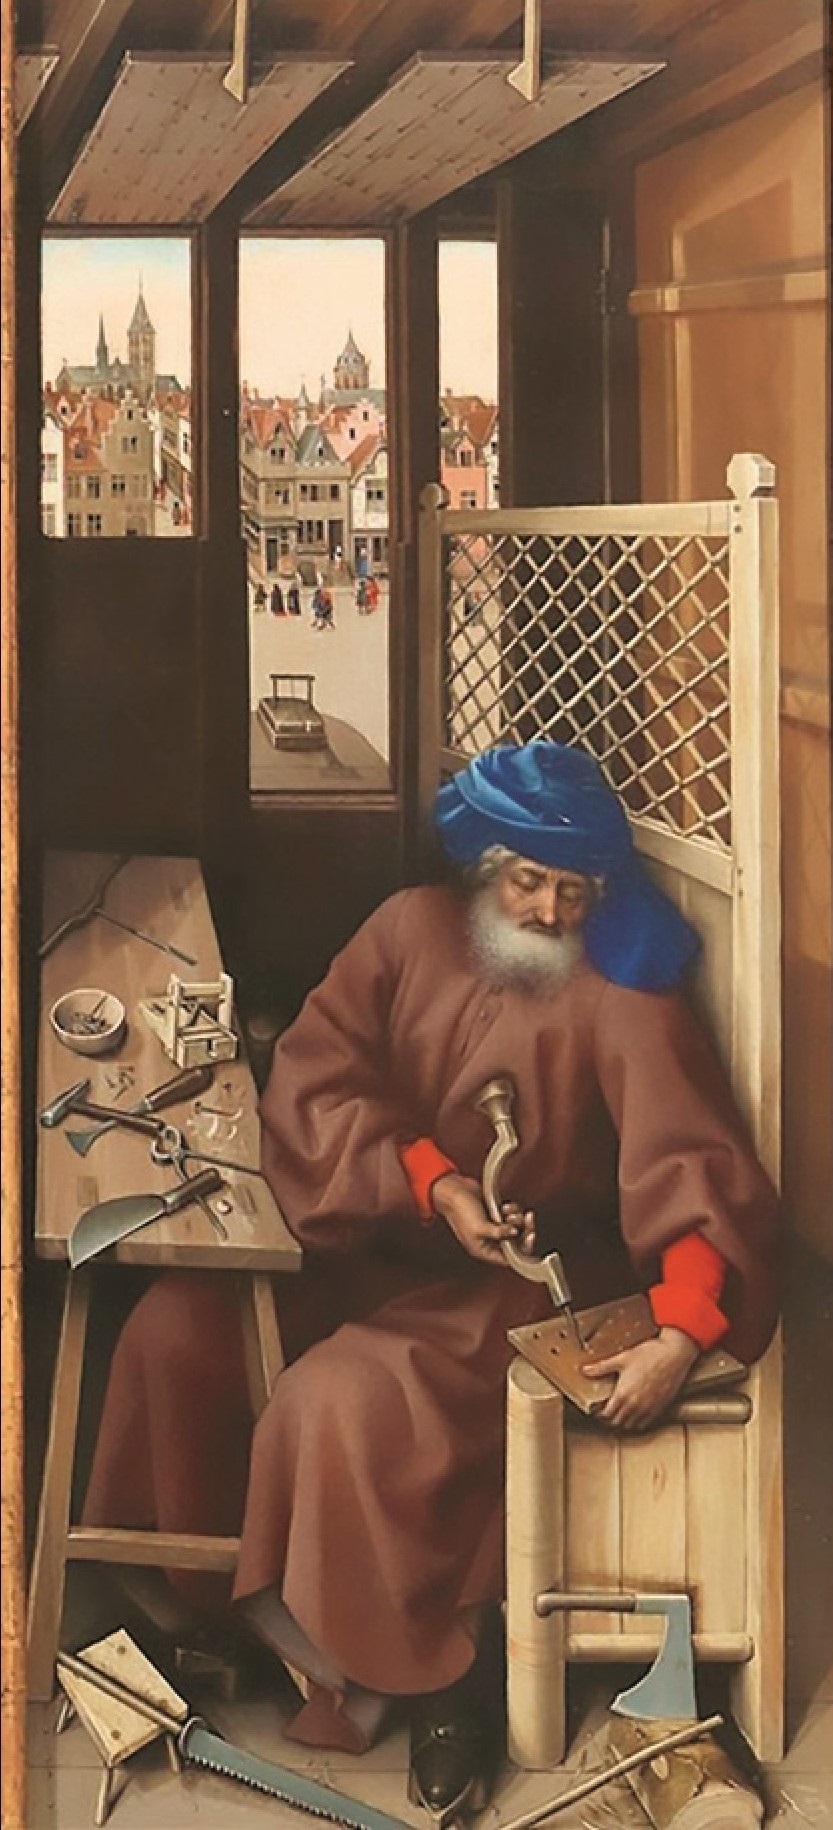 Right window of The Merode Altarpiece by the Master of Flémalle, showing a craftsman in his sparsely furnished workshop surrounded by tools